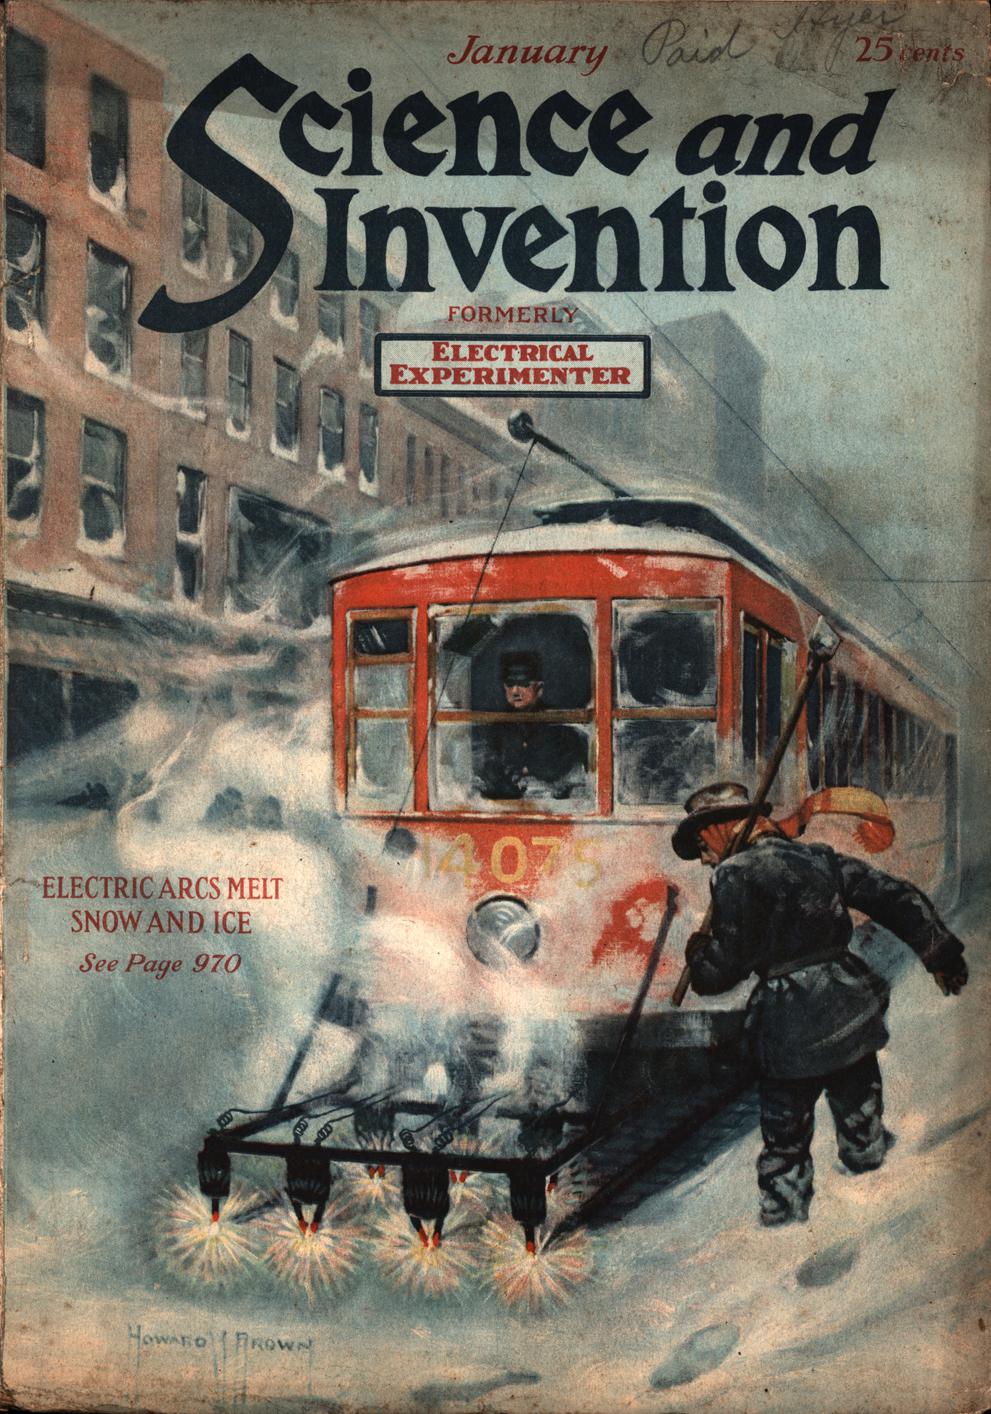 1921 - Science and invention - Vol. 8, No. 9